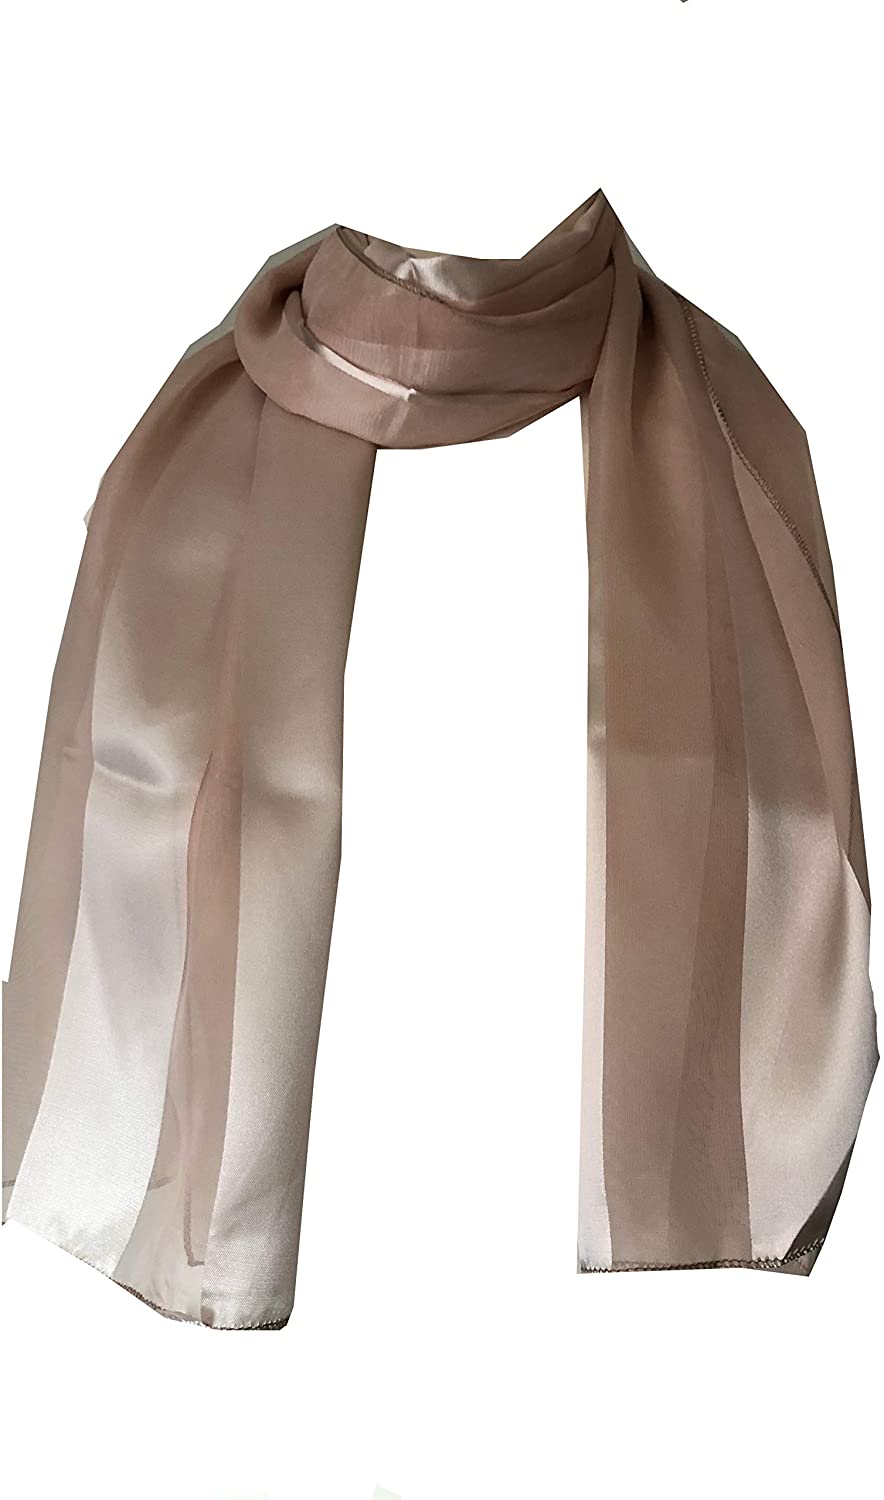 Plain Beige Faux Chiffon and Satin Style Striped Scarf Thin Pretty Scarf Great for Any Outfit Lovely Gift